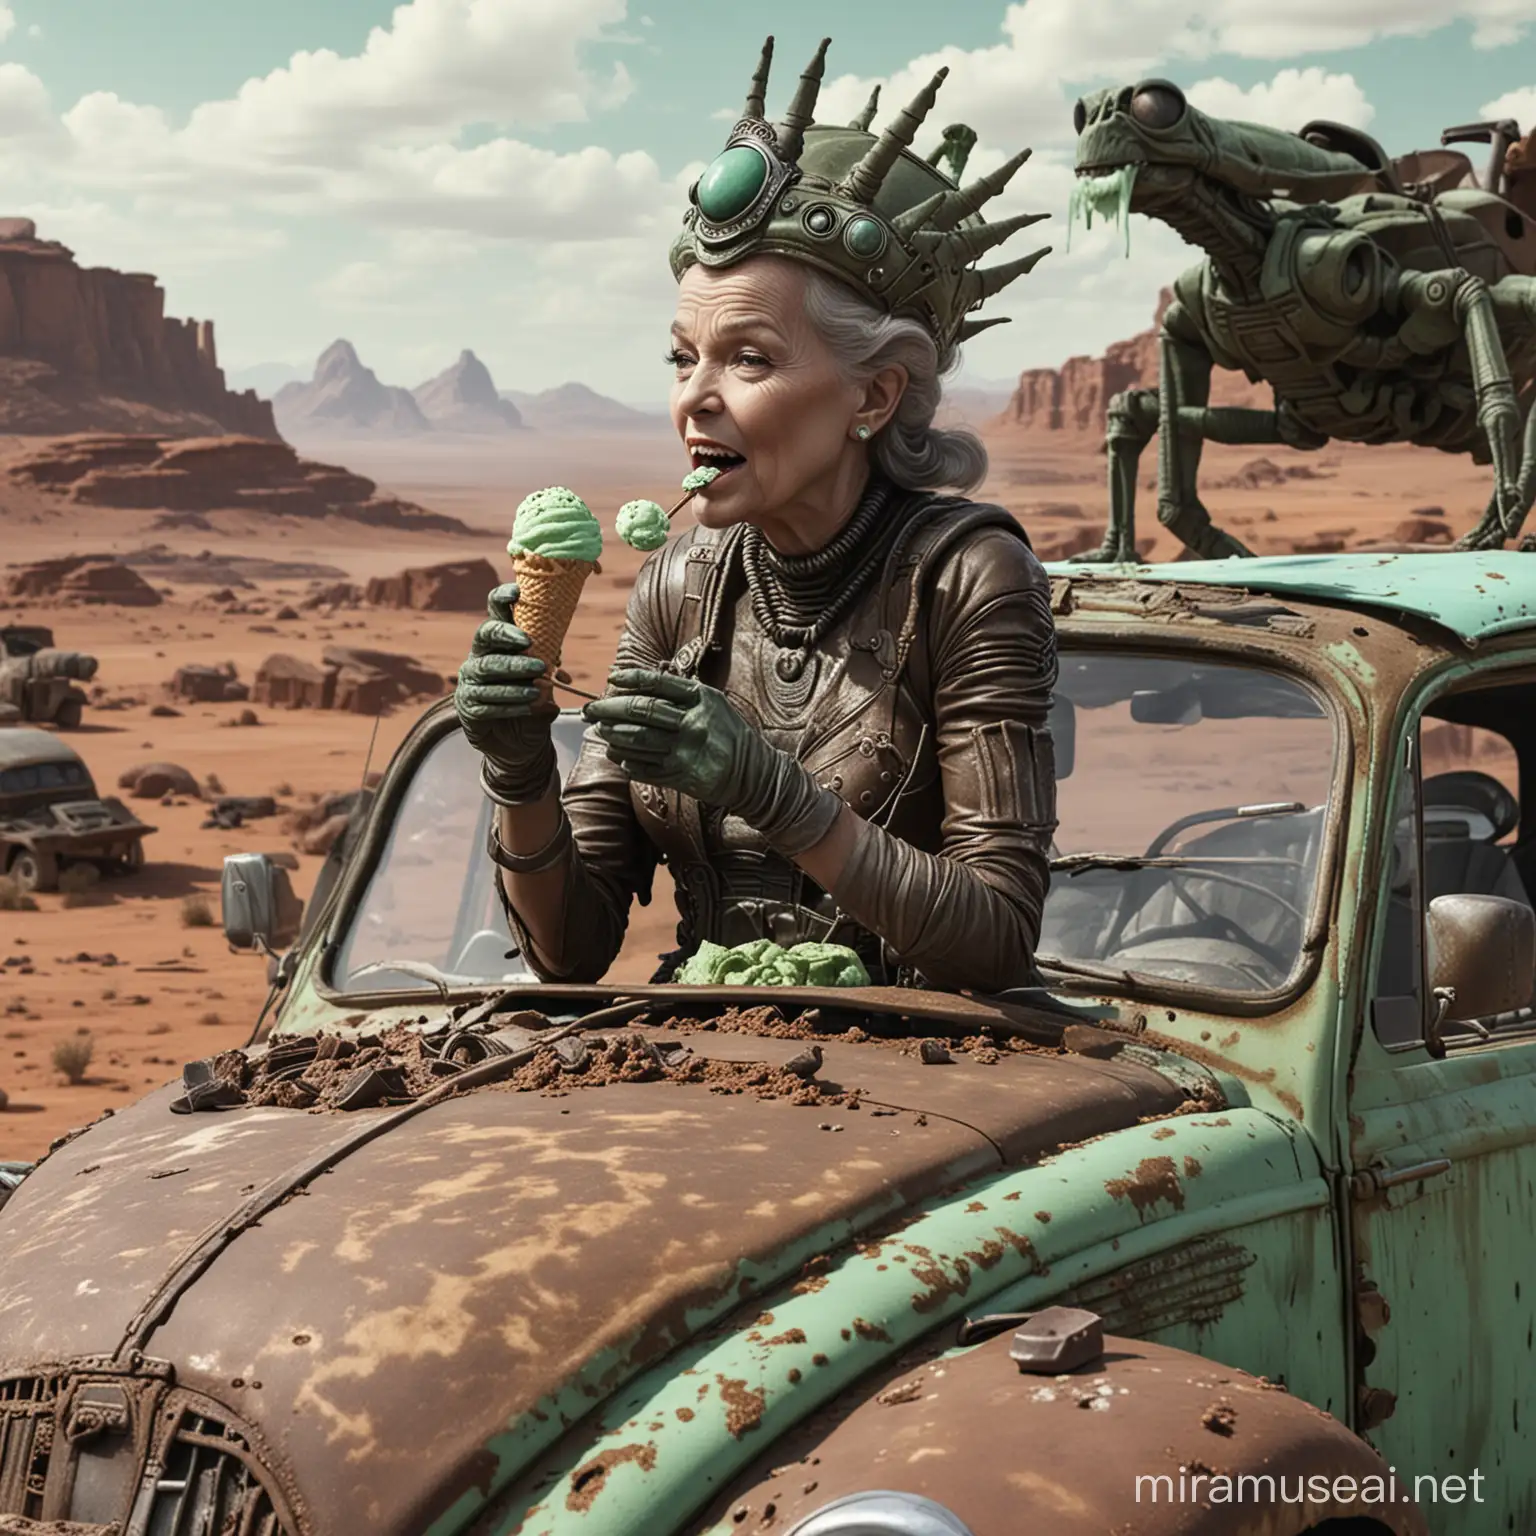 The Queen from aliens sitting on top of a rusty vw Beetle, eating a mint and chocolate ice cream, hd, detailed, alien planet as background